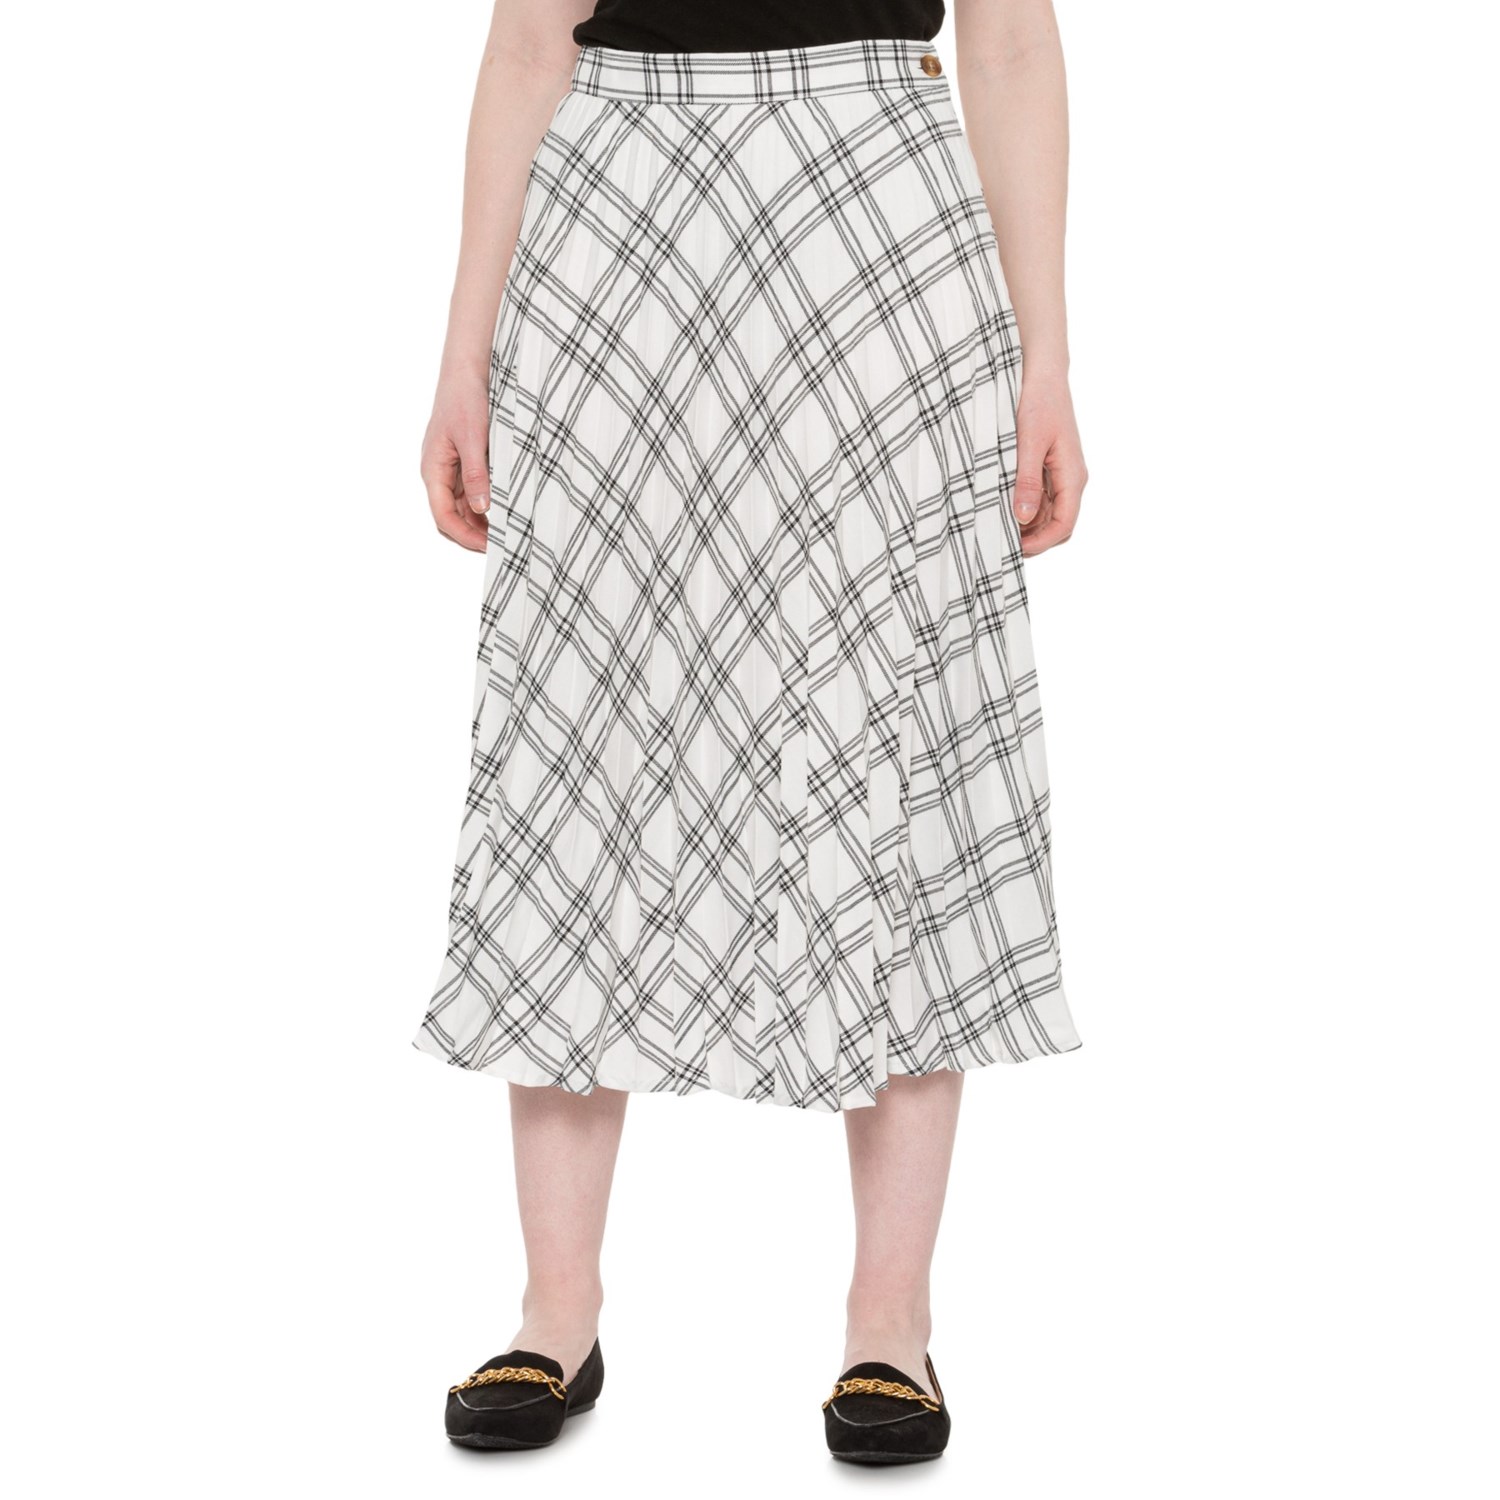 Barbour Brook Skirt (For Women) - Save 58%